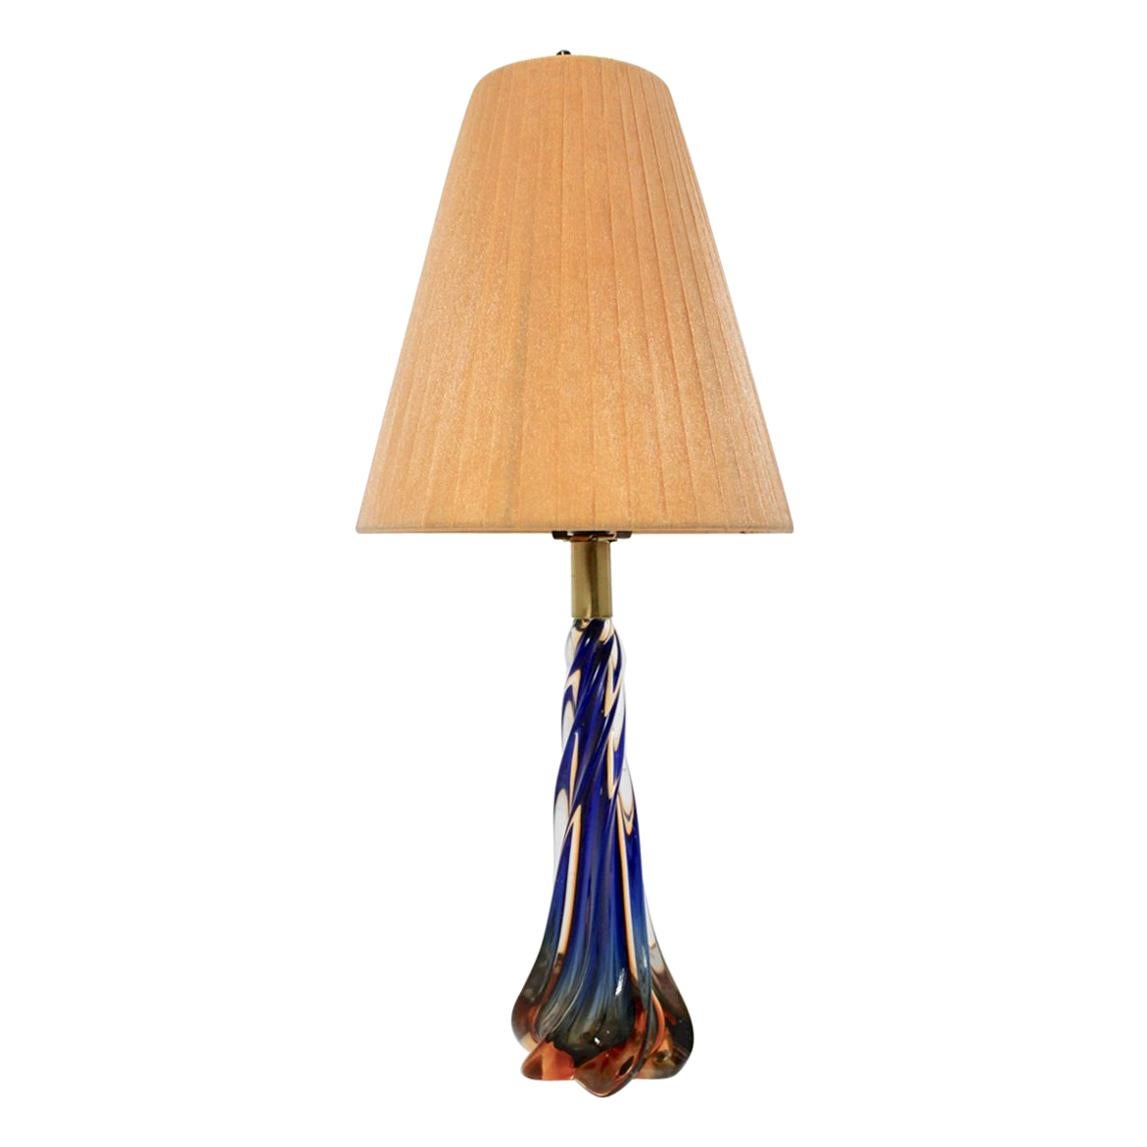 Mid-Century Modern Vintage Blue and Orange Murano Glass Table Lamp, 1950s, Italy For Sale